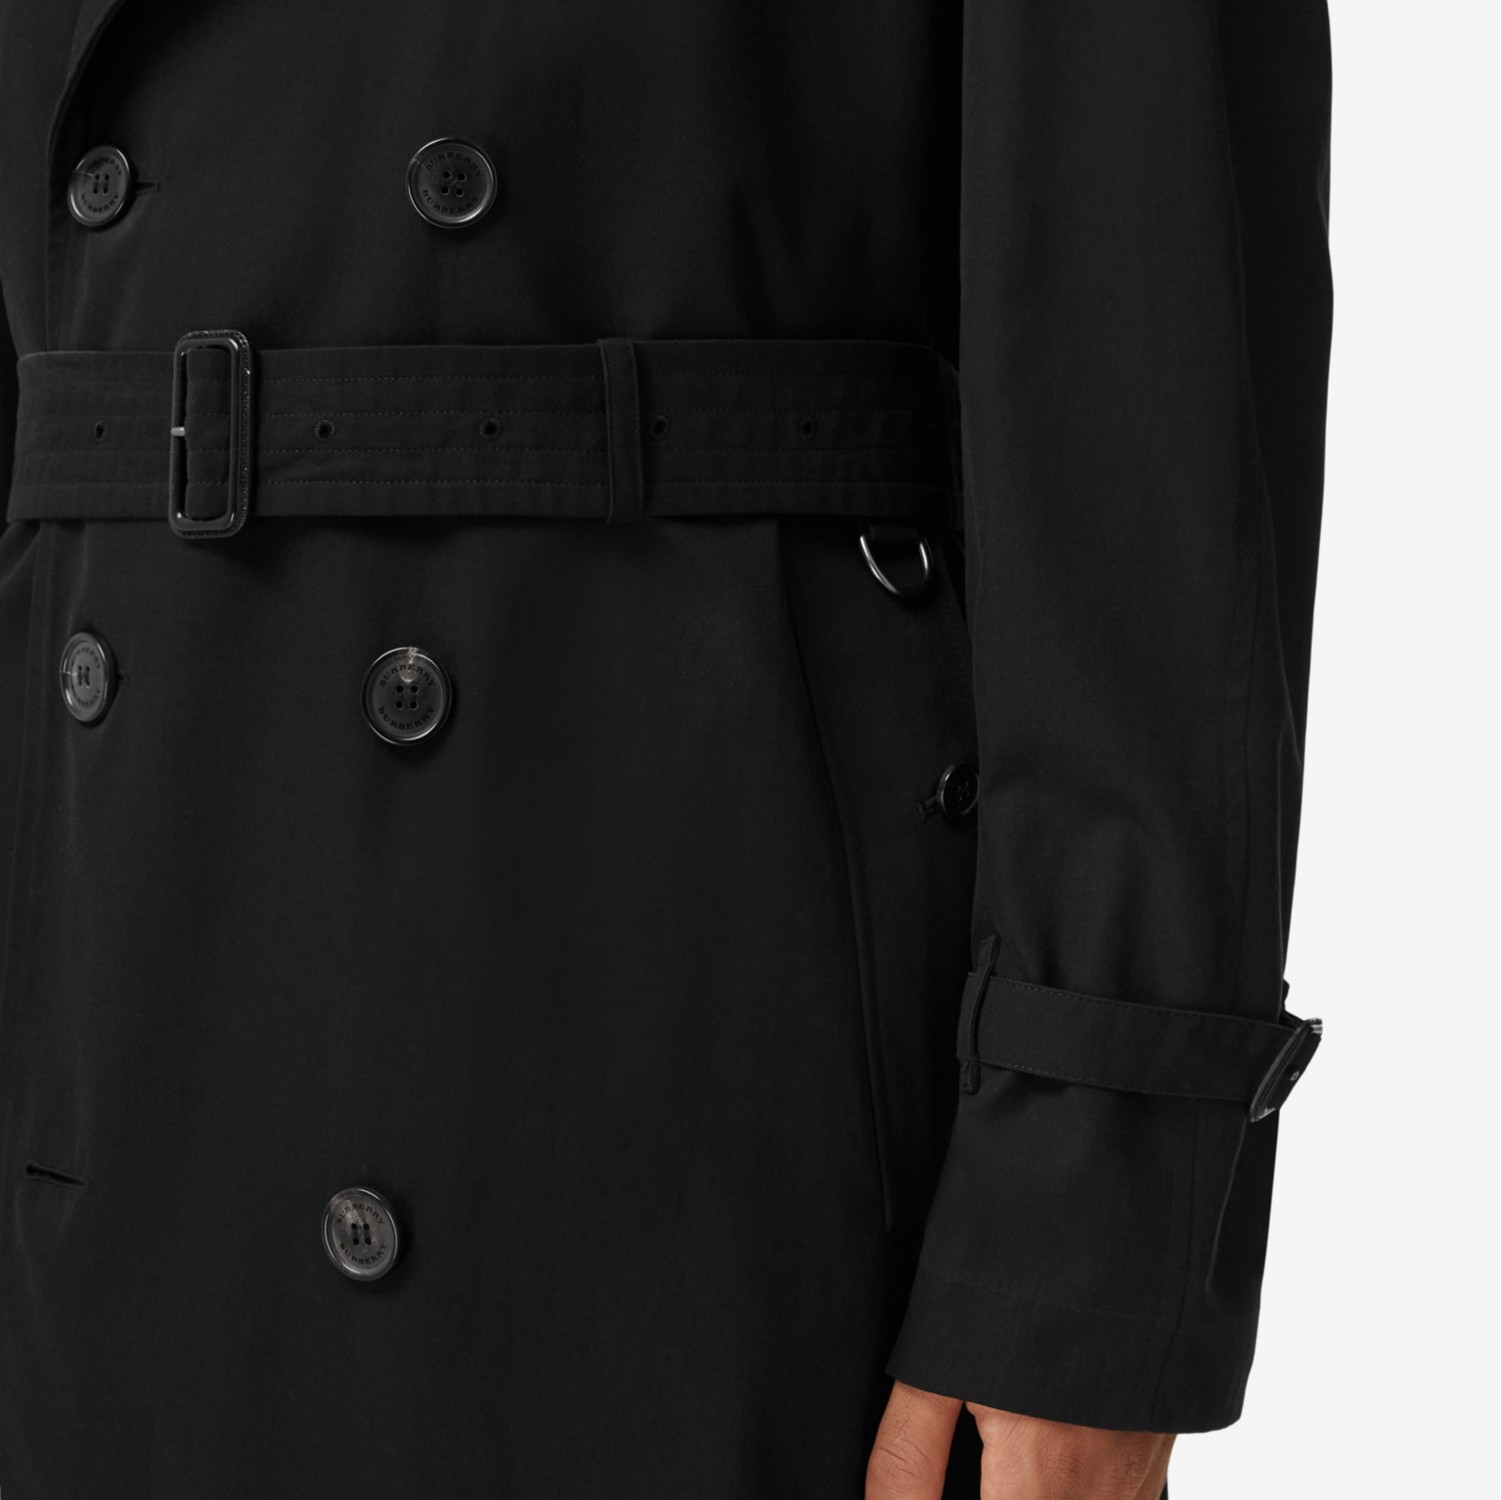 Long Lightweight Westminster Trench Coat